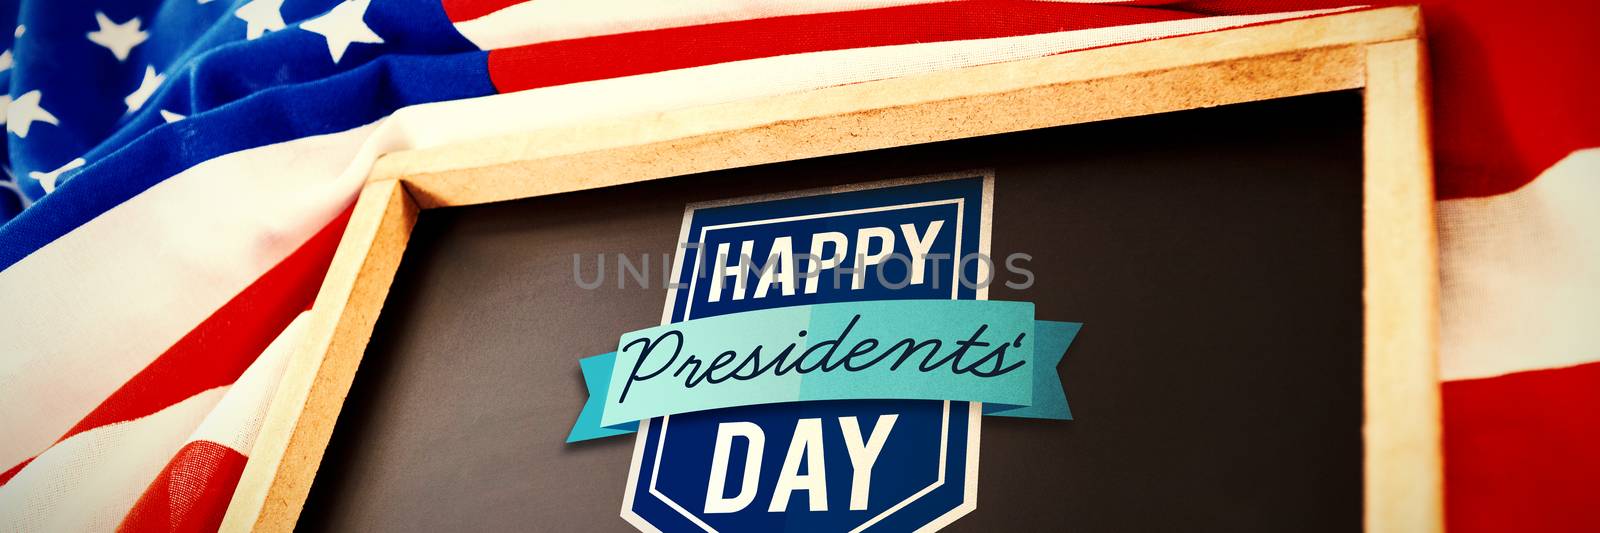 Composite image of happy presidents day by Wavebreakmedia